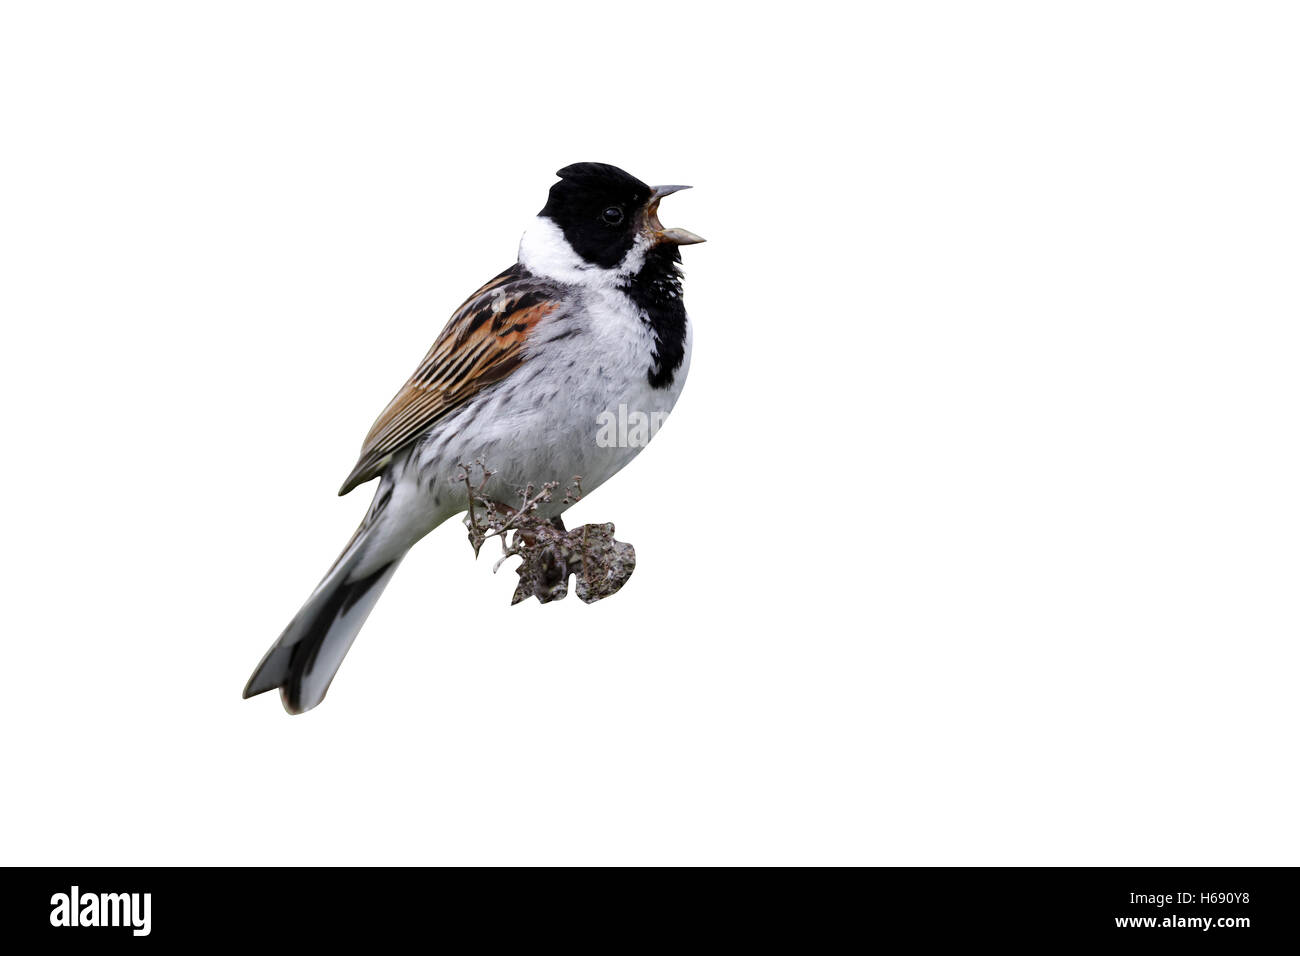 Reed bunting, Emberiza schoeniclus, single male singing on perch, Midlands, June 2011 Stock Photo